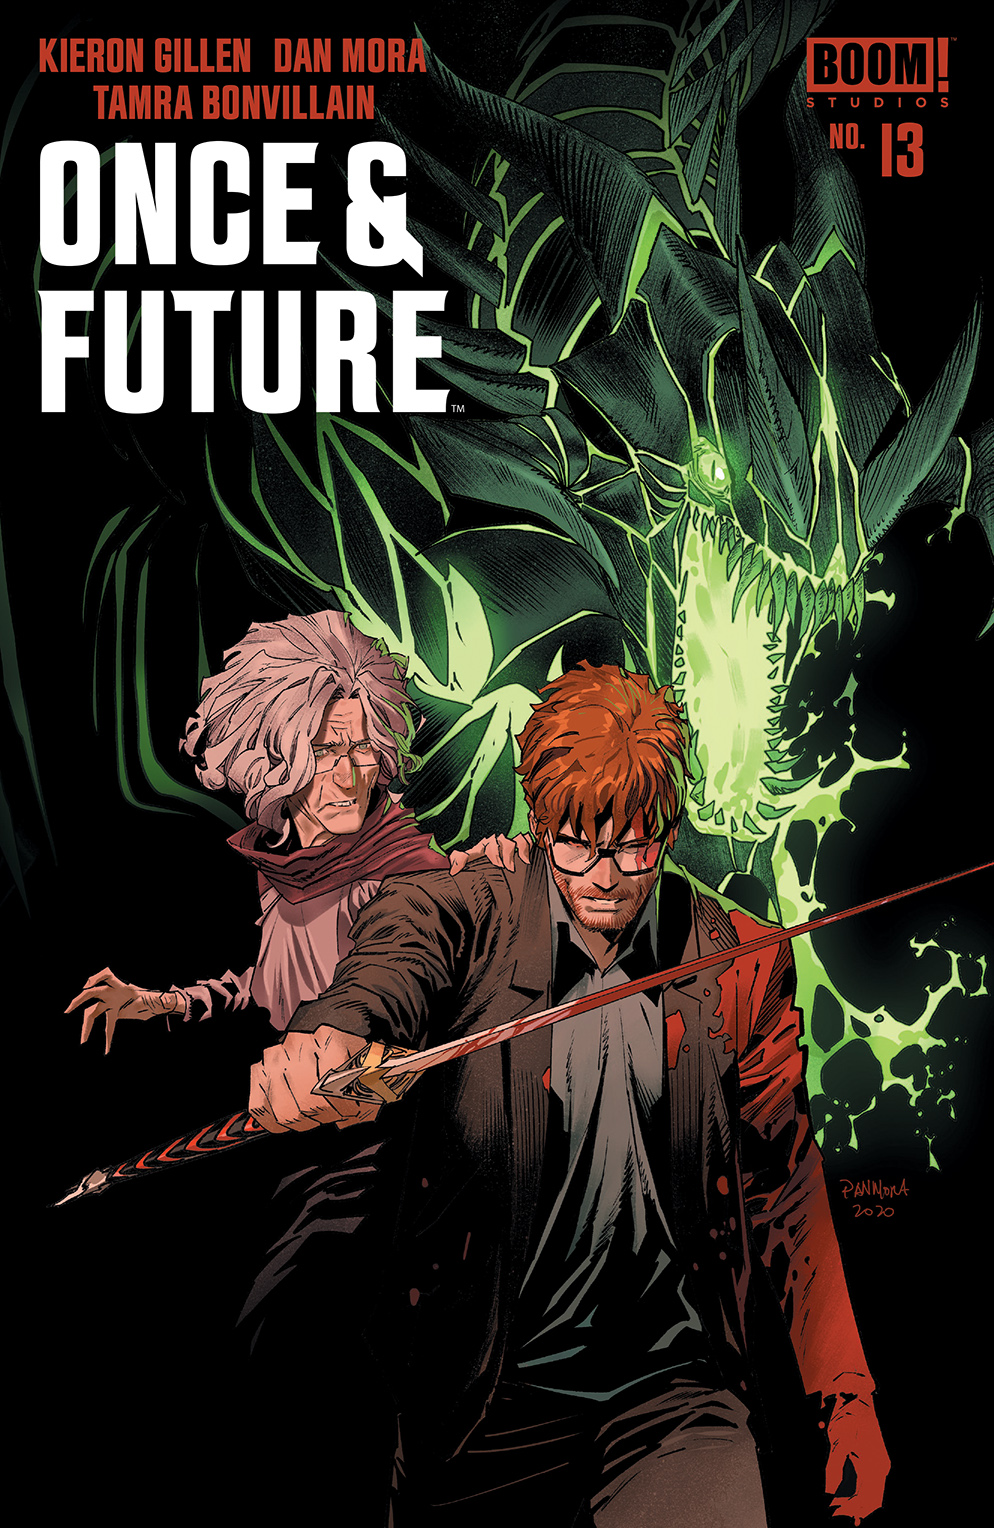 Once & Future #13 Cover A